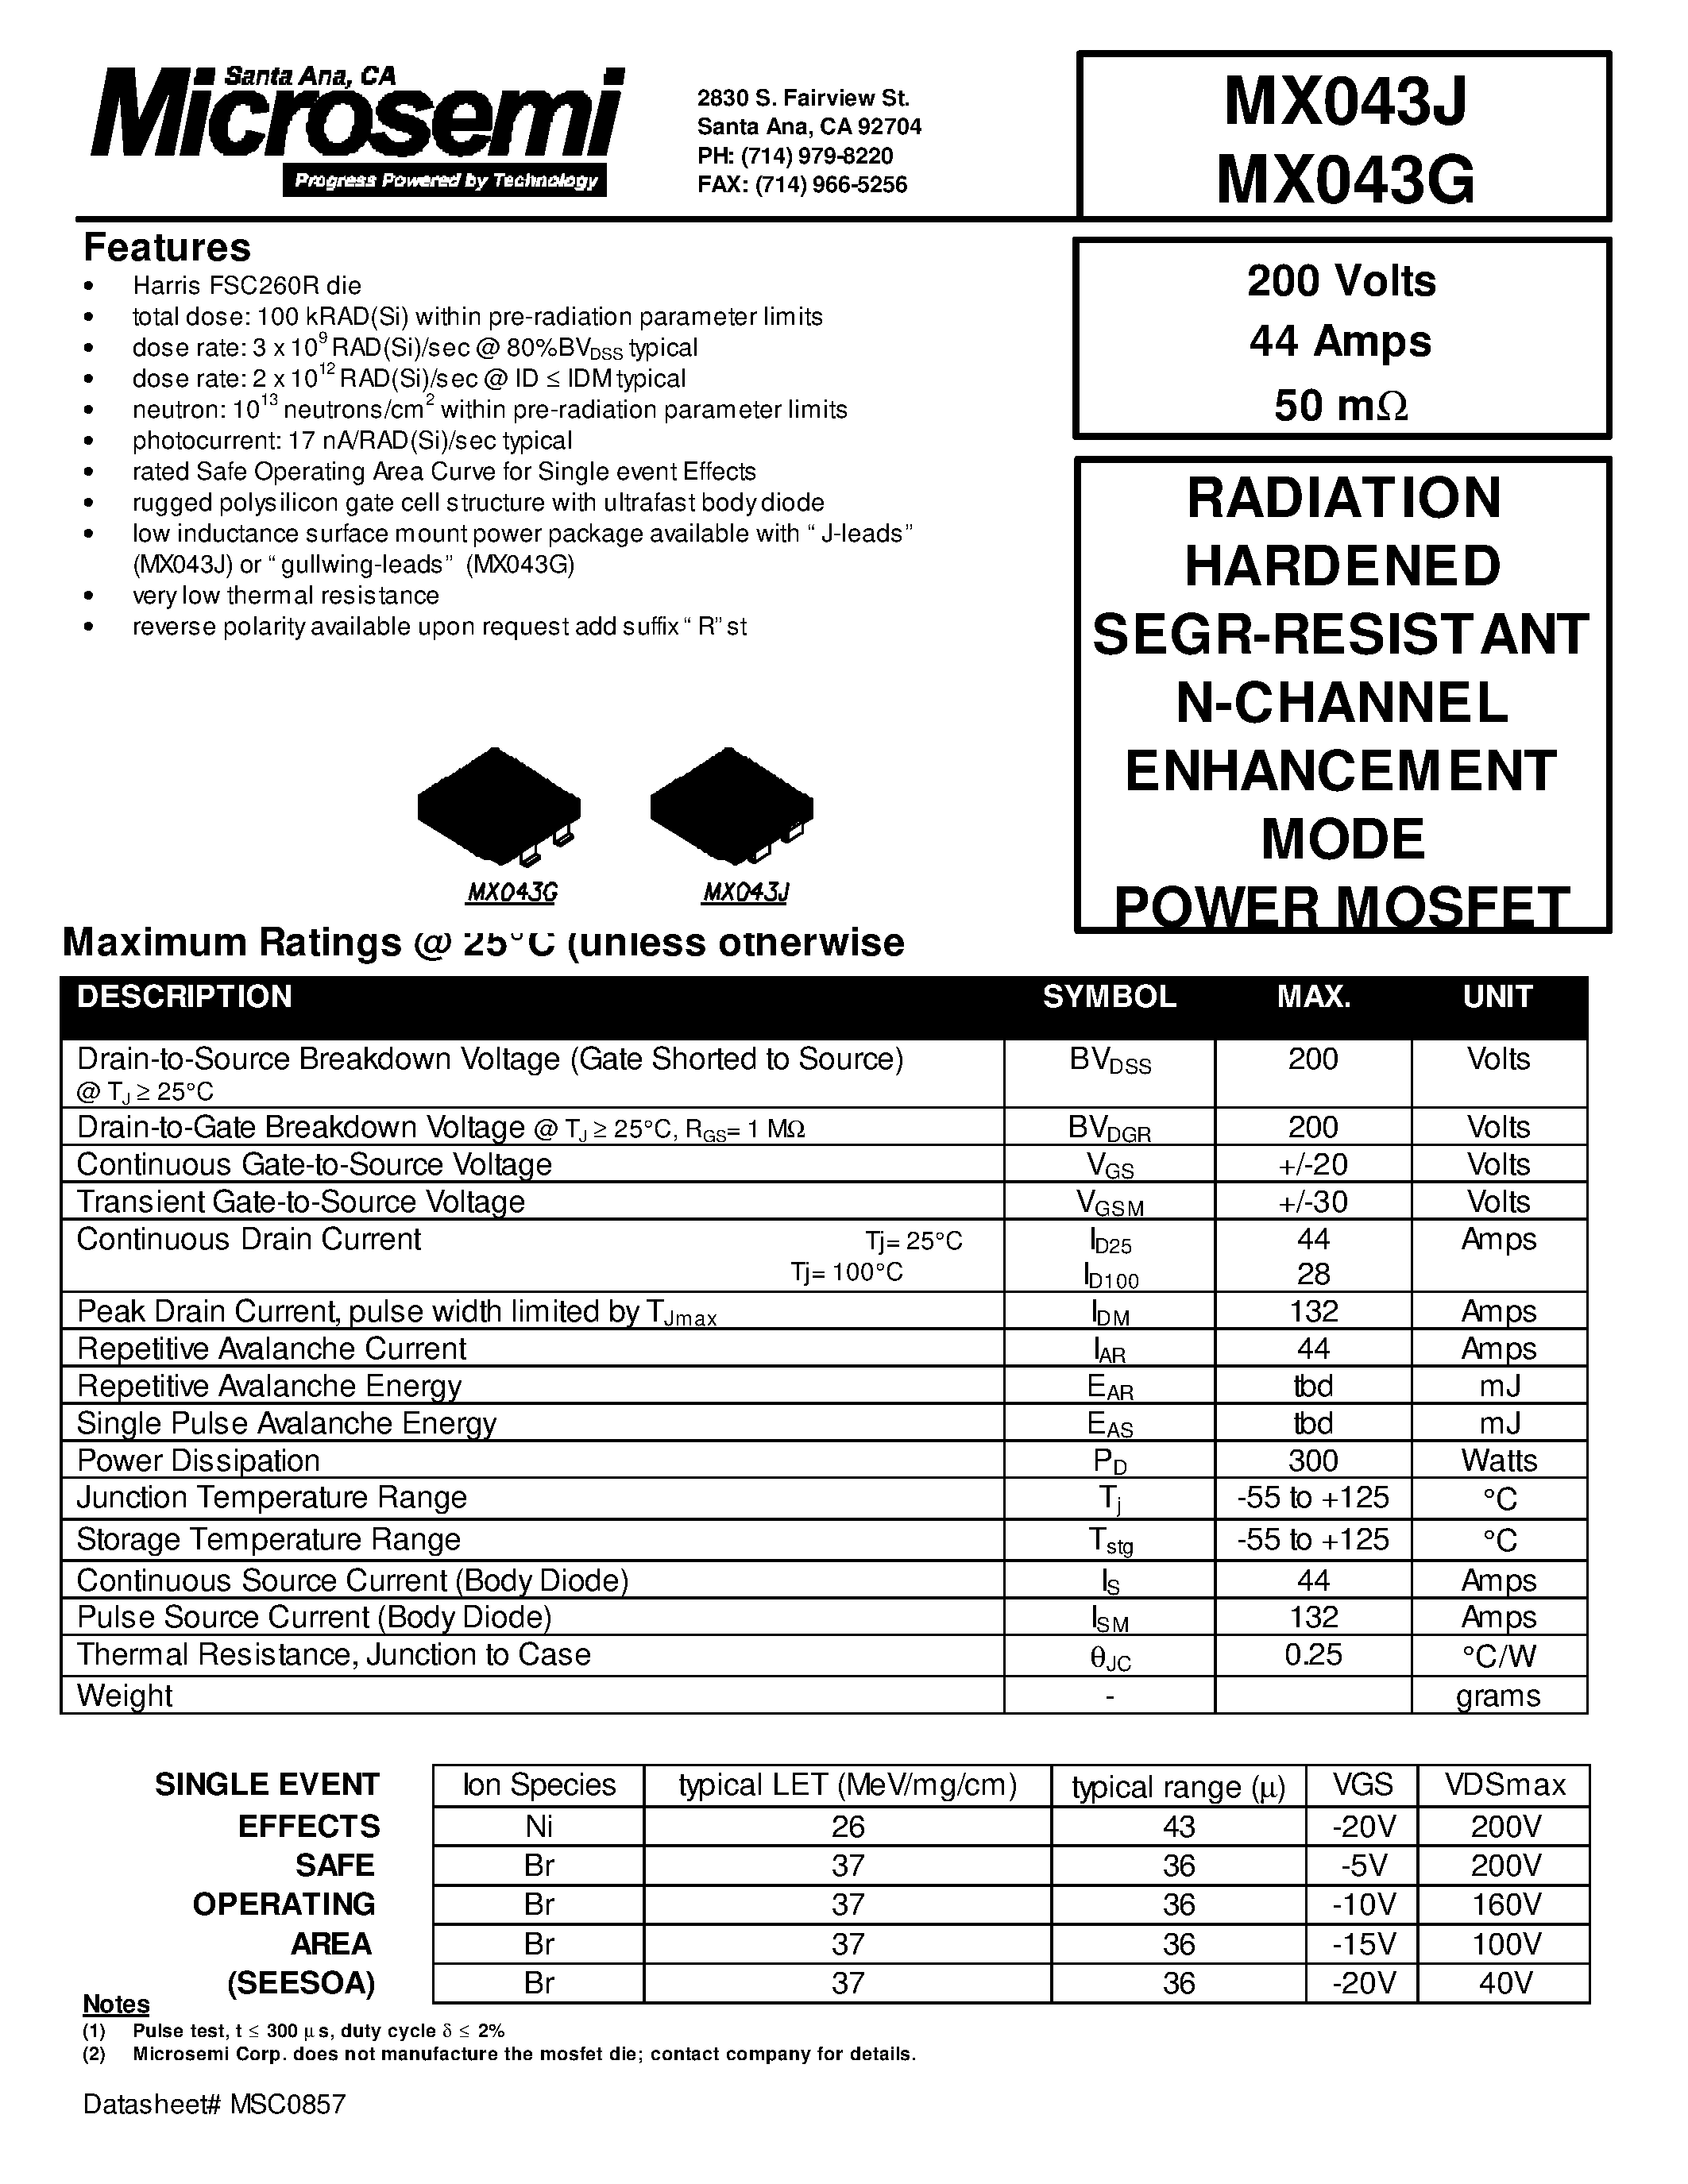 Datasheet MX043 - RADIATION HARDENED SEGR-RESISTANT N-CHANNEL ENHANCEMENT MODE POWER MOSFET page 1